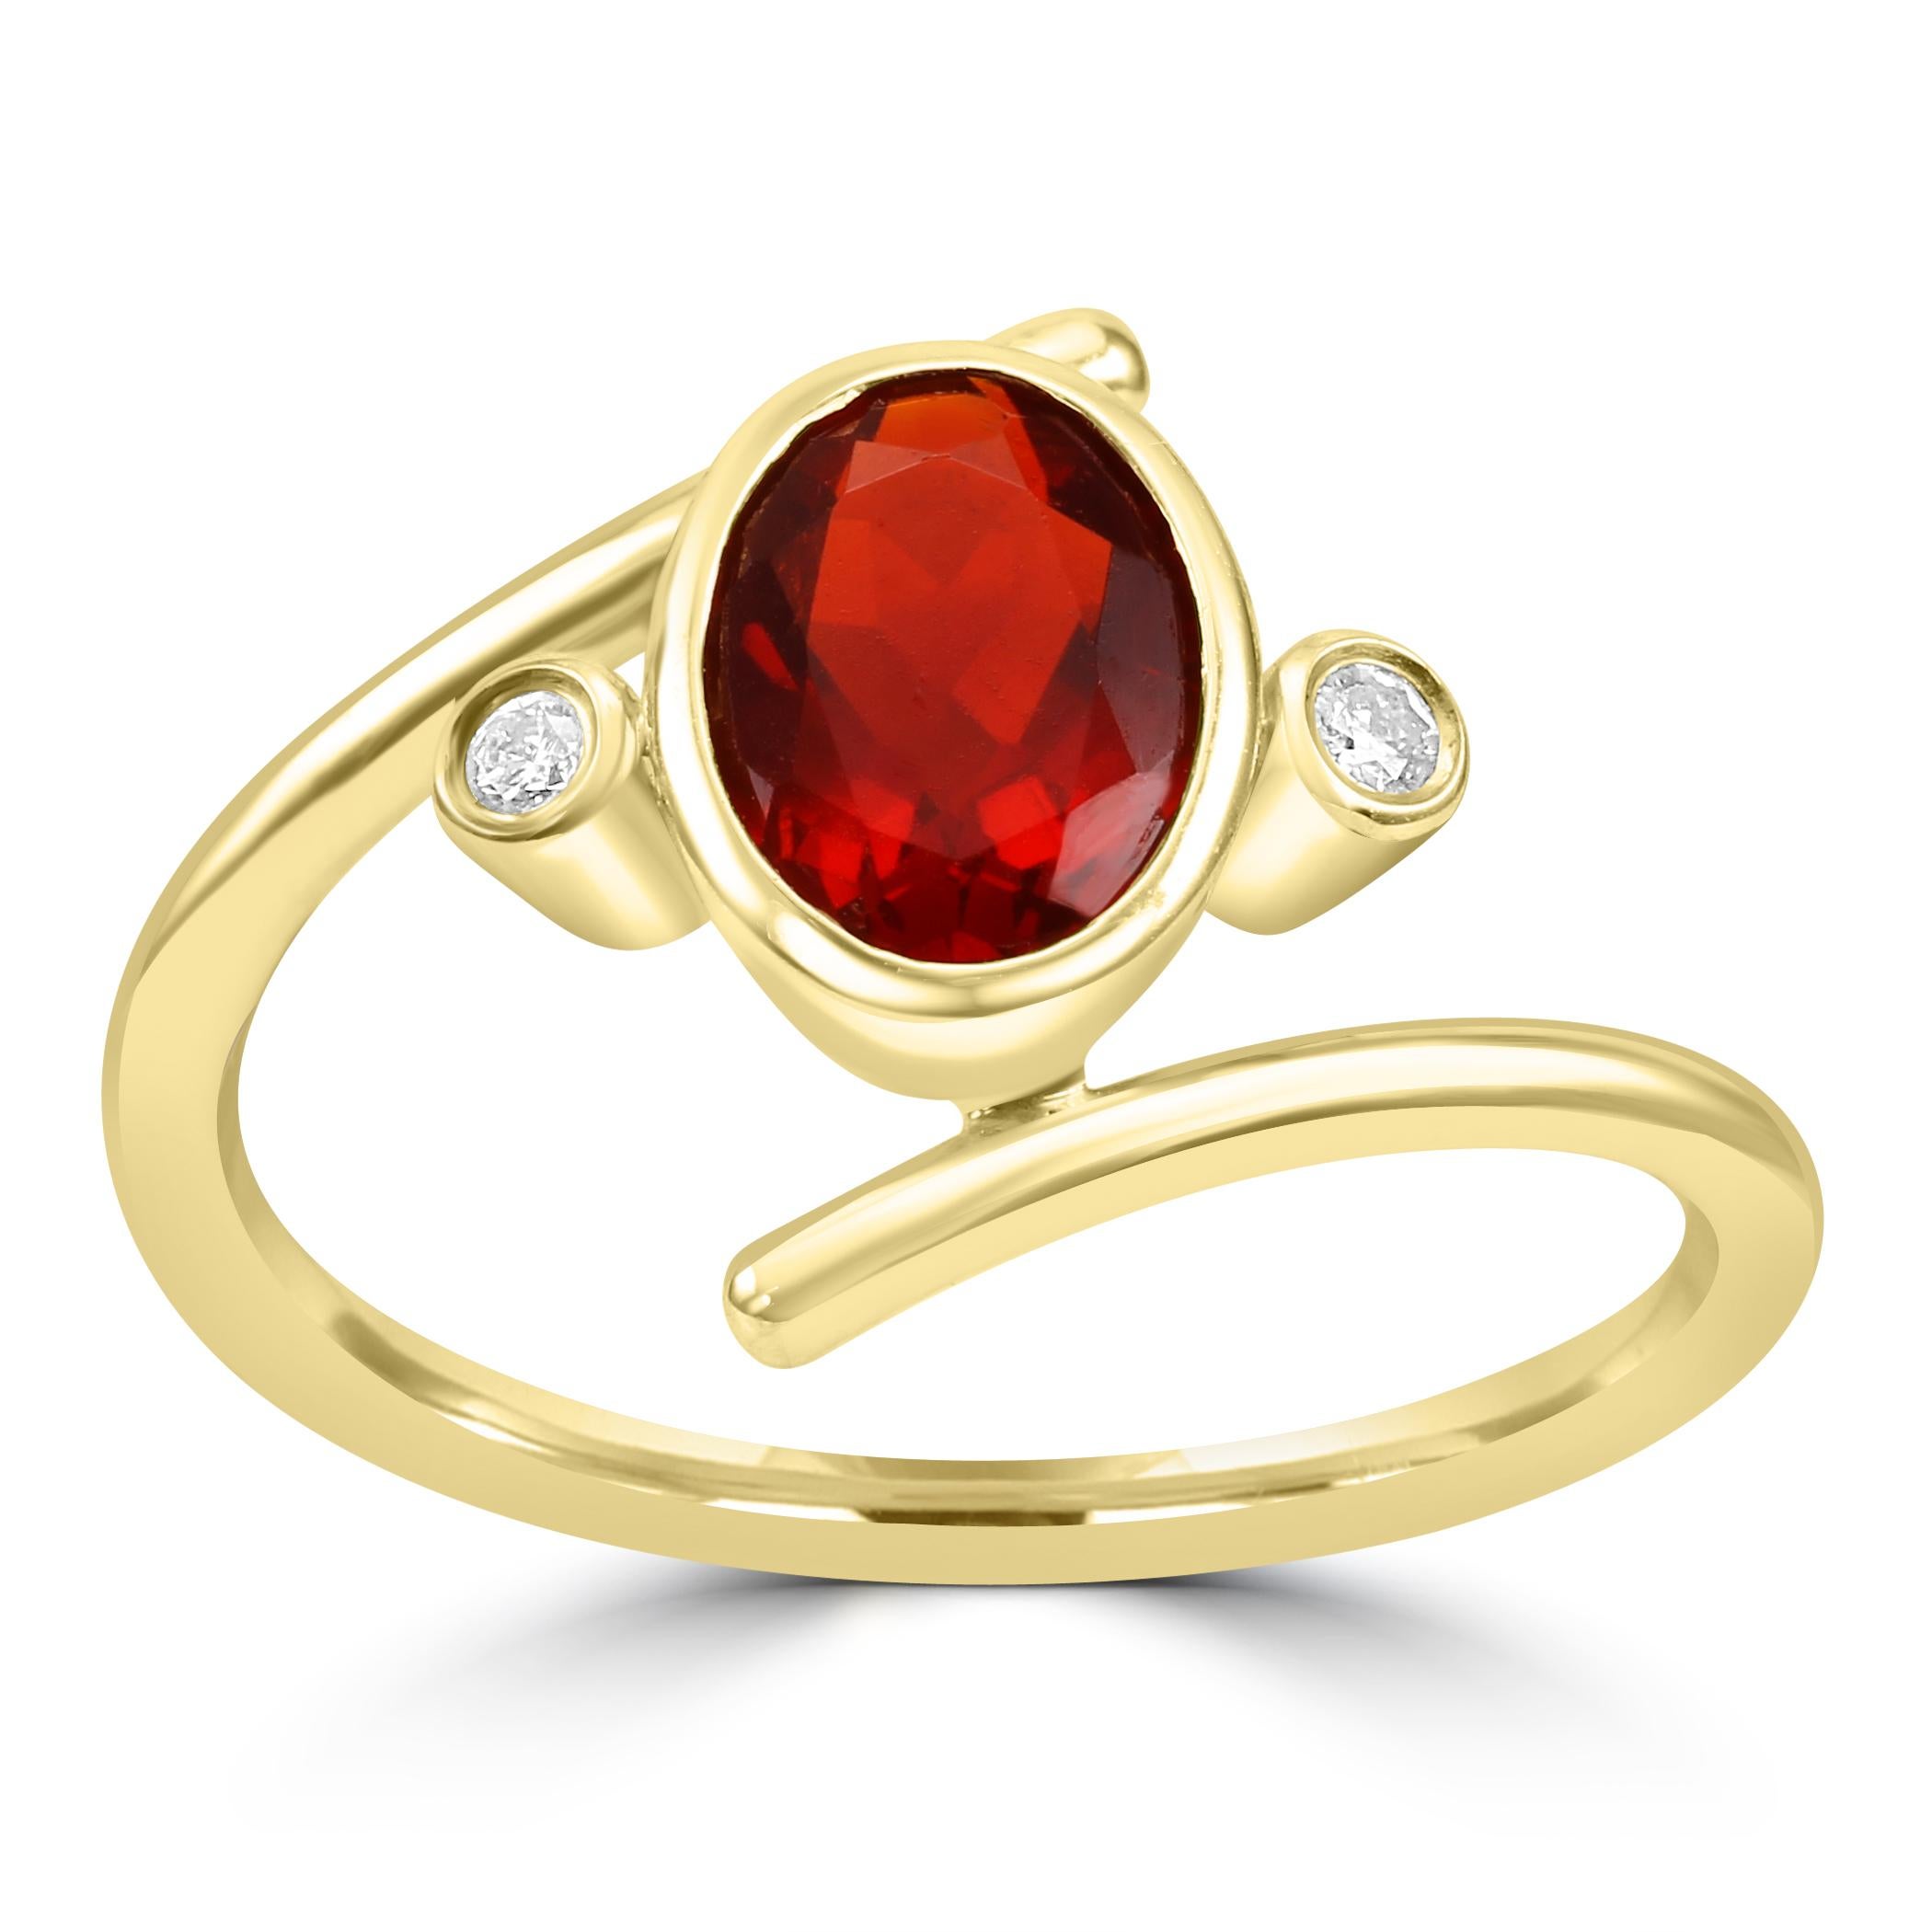 The centerpiece of this ring is the Mexican Fire Opal, renowned for its intense play of colors that mimic the flickering flames. Weighing 0.76 carats, the opal steals the spotlight, emanating a fiery glow that captures attention and adds a dynamic